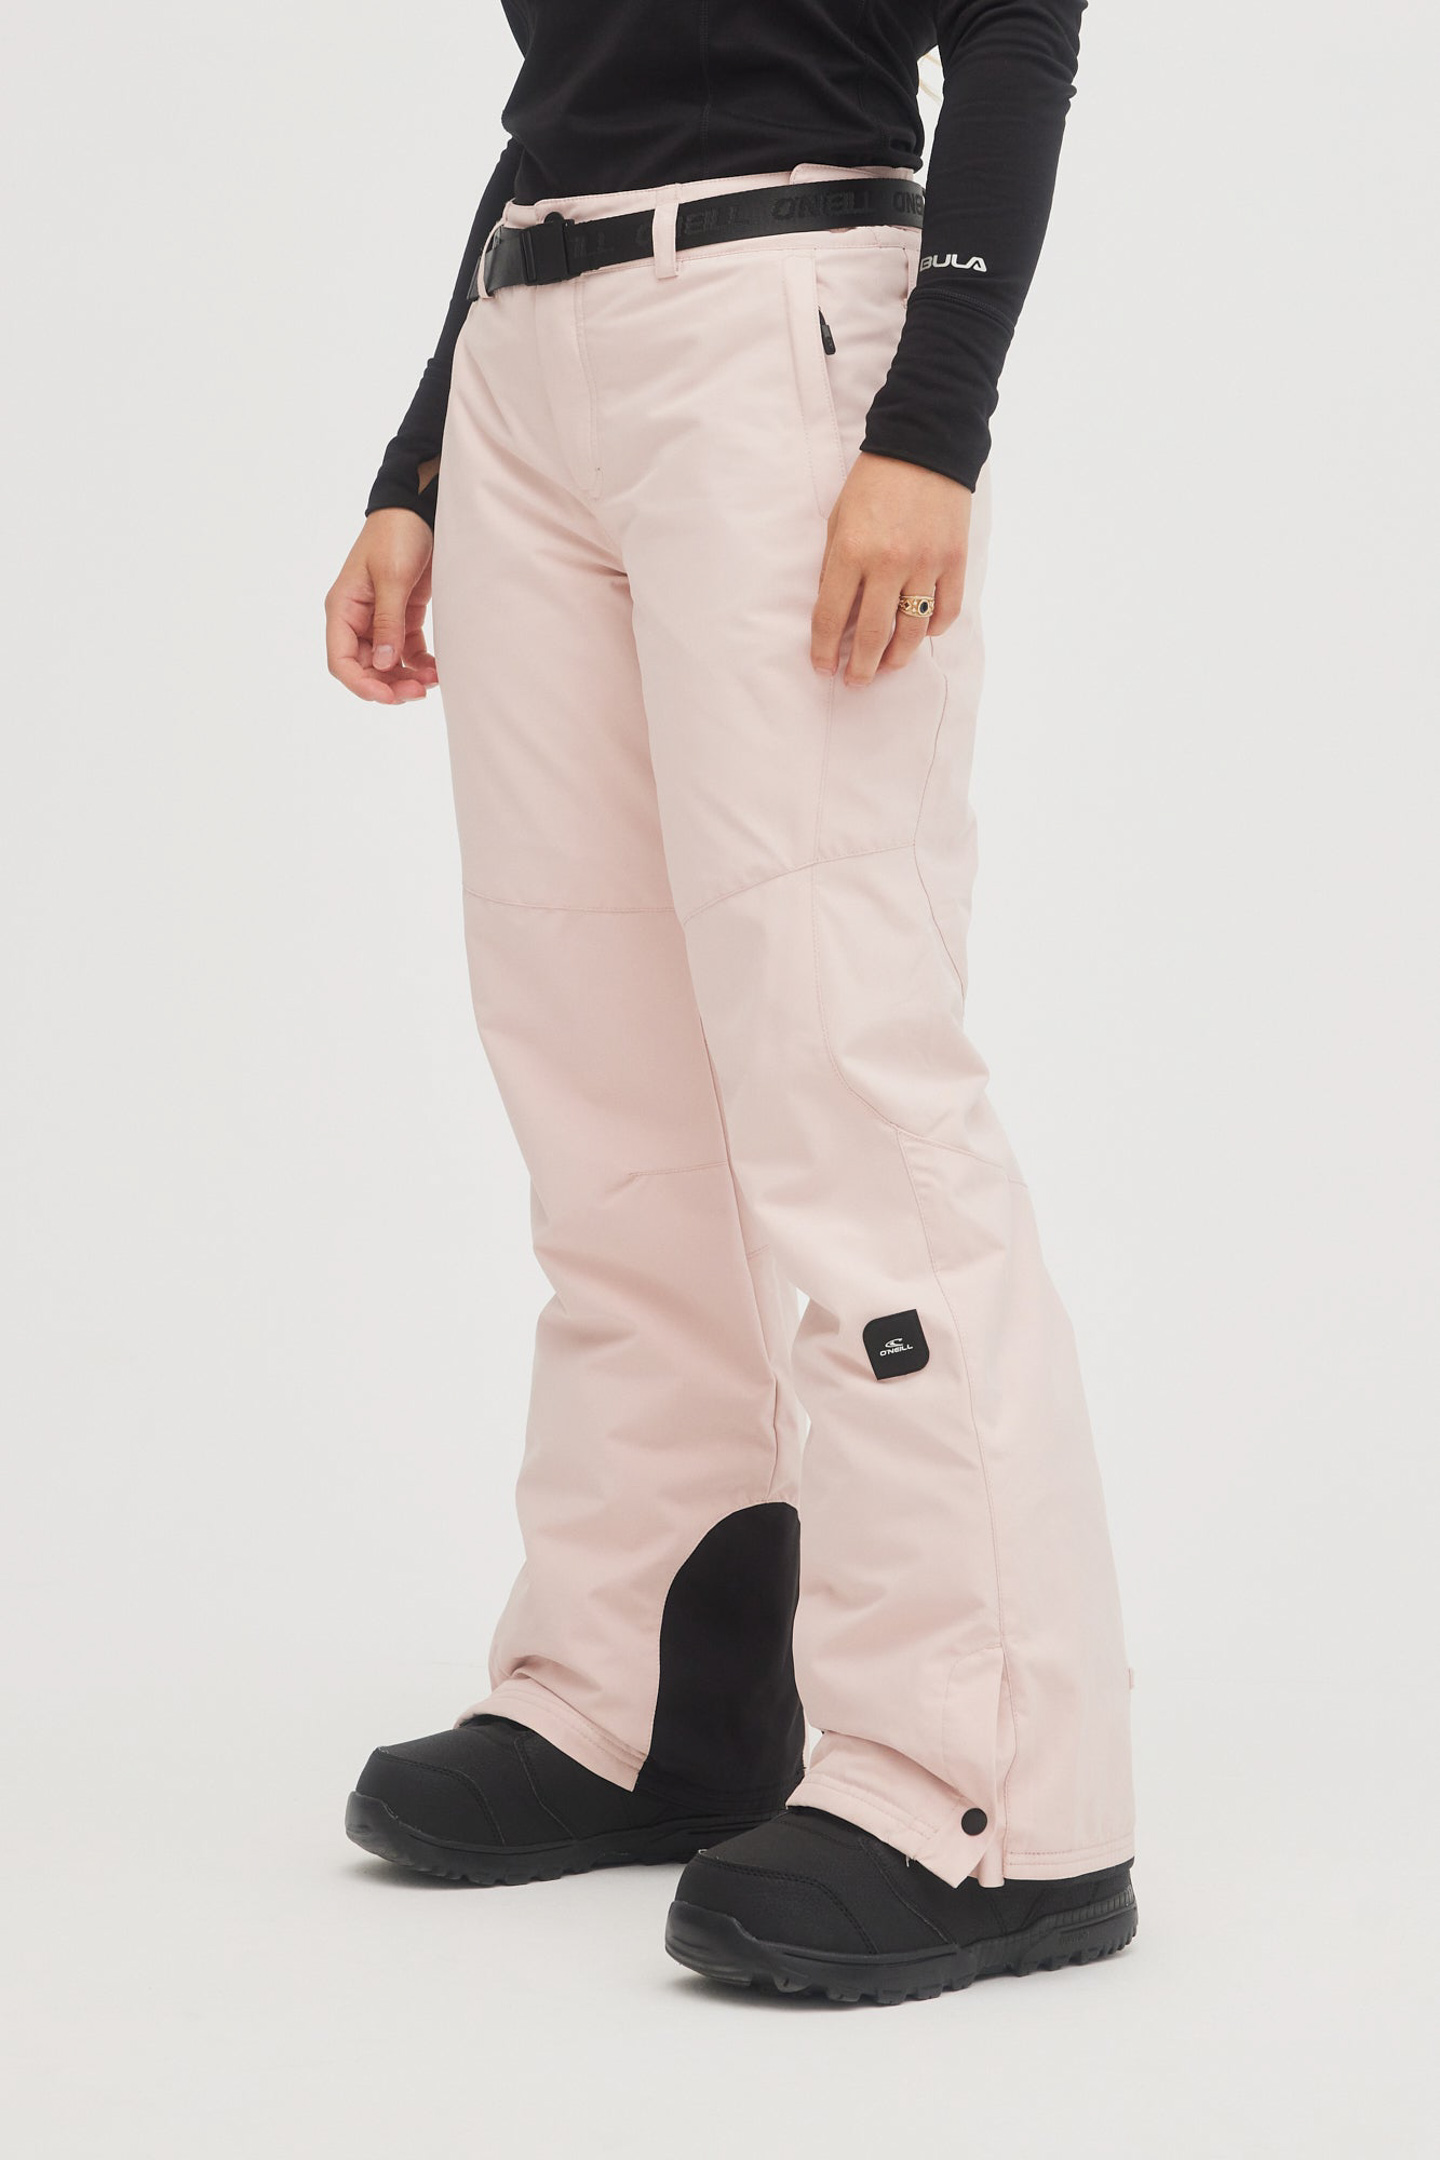 Oneill Star Slim Snow Pants Womens in Conch Shell - TRIGGER BROS